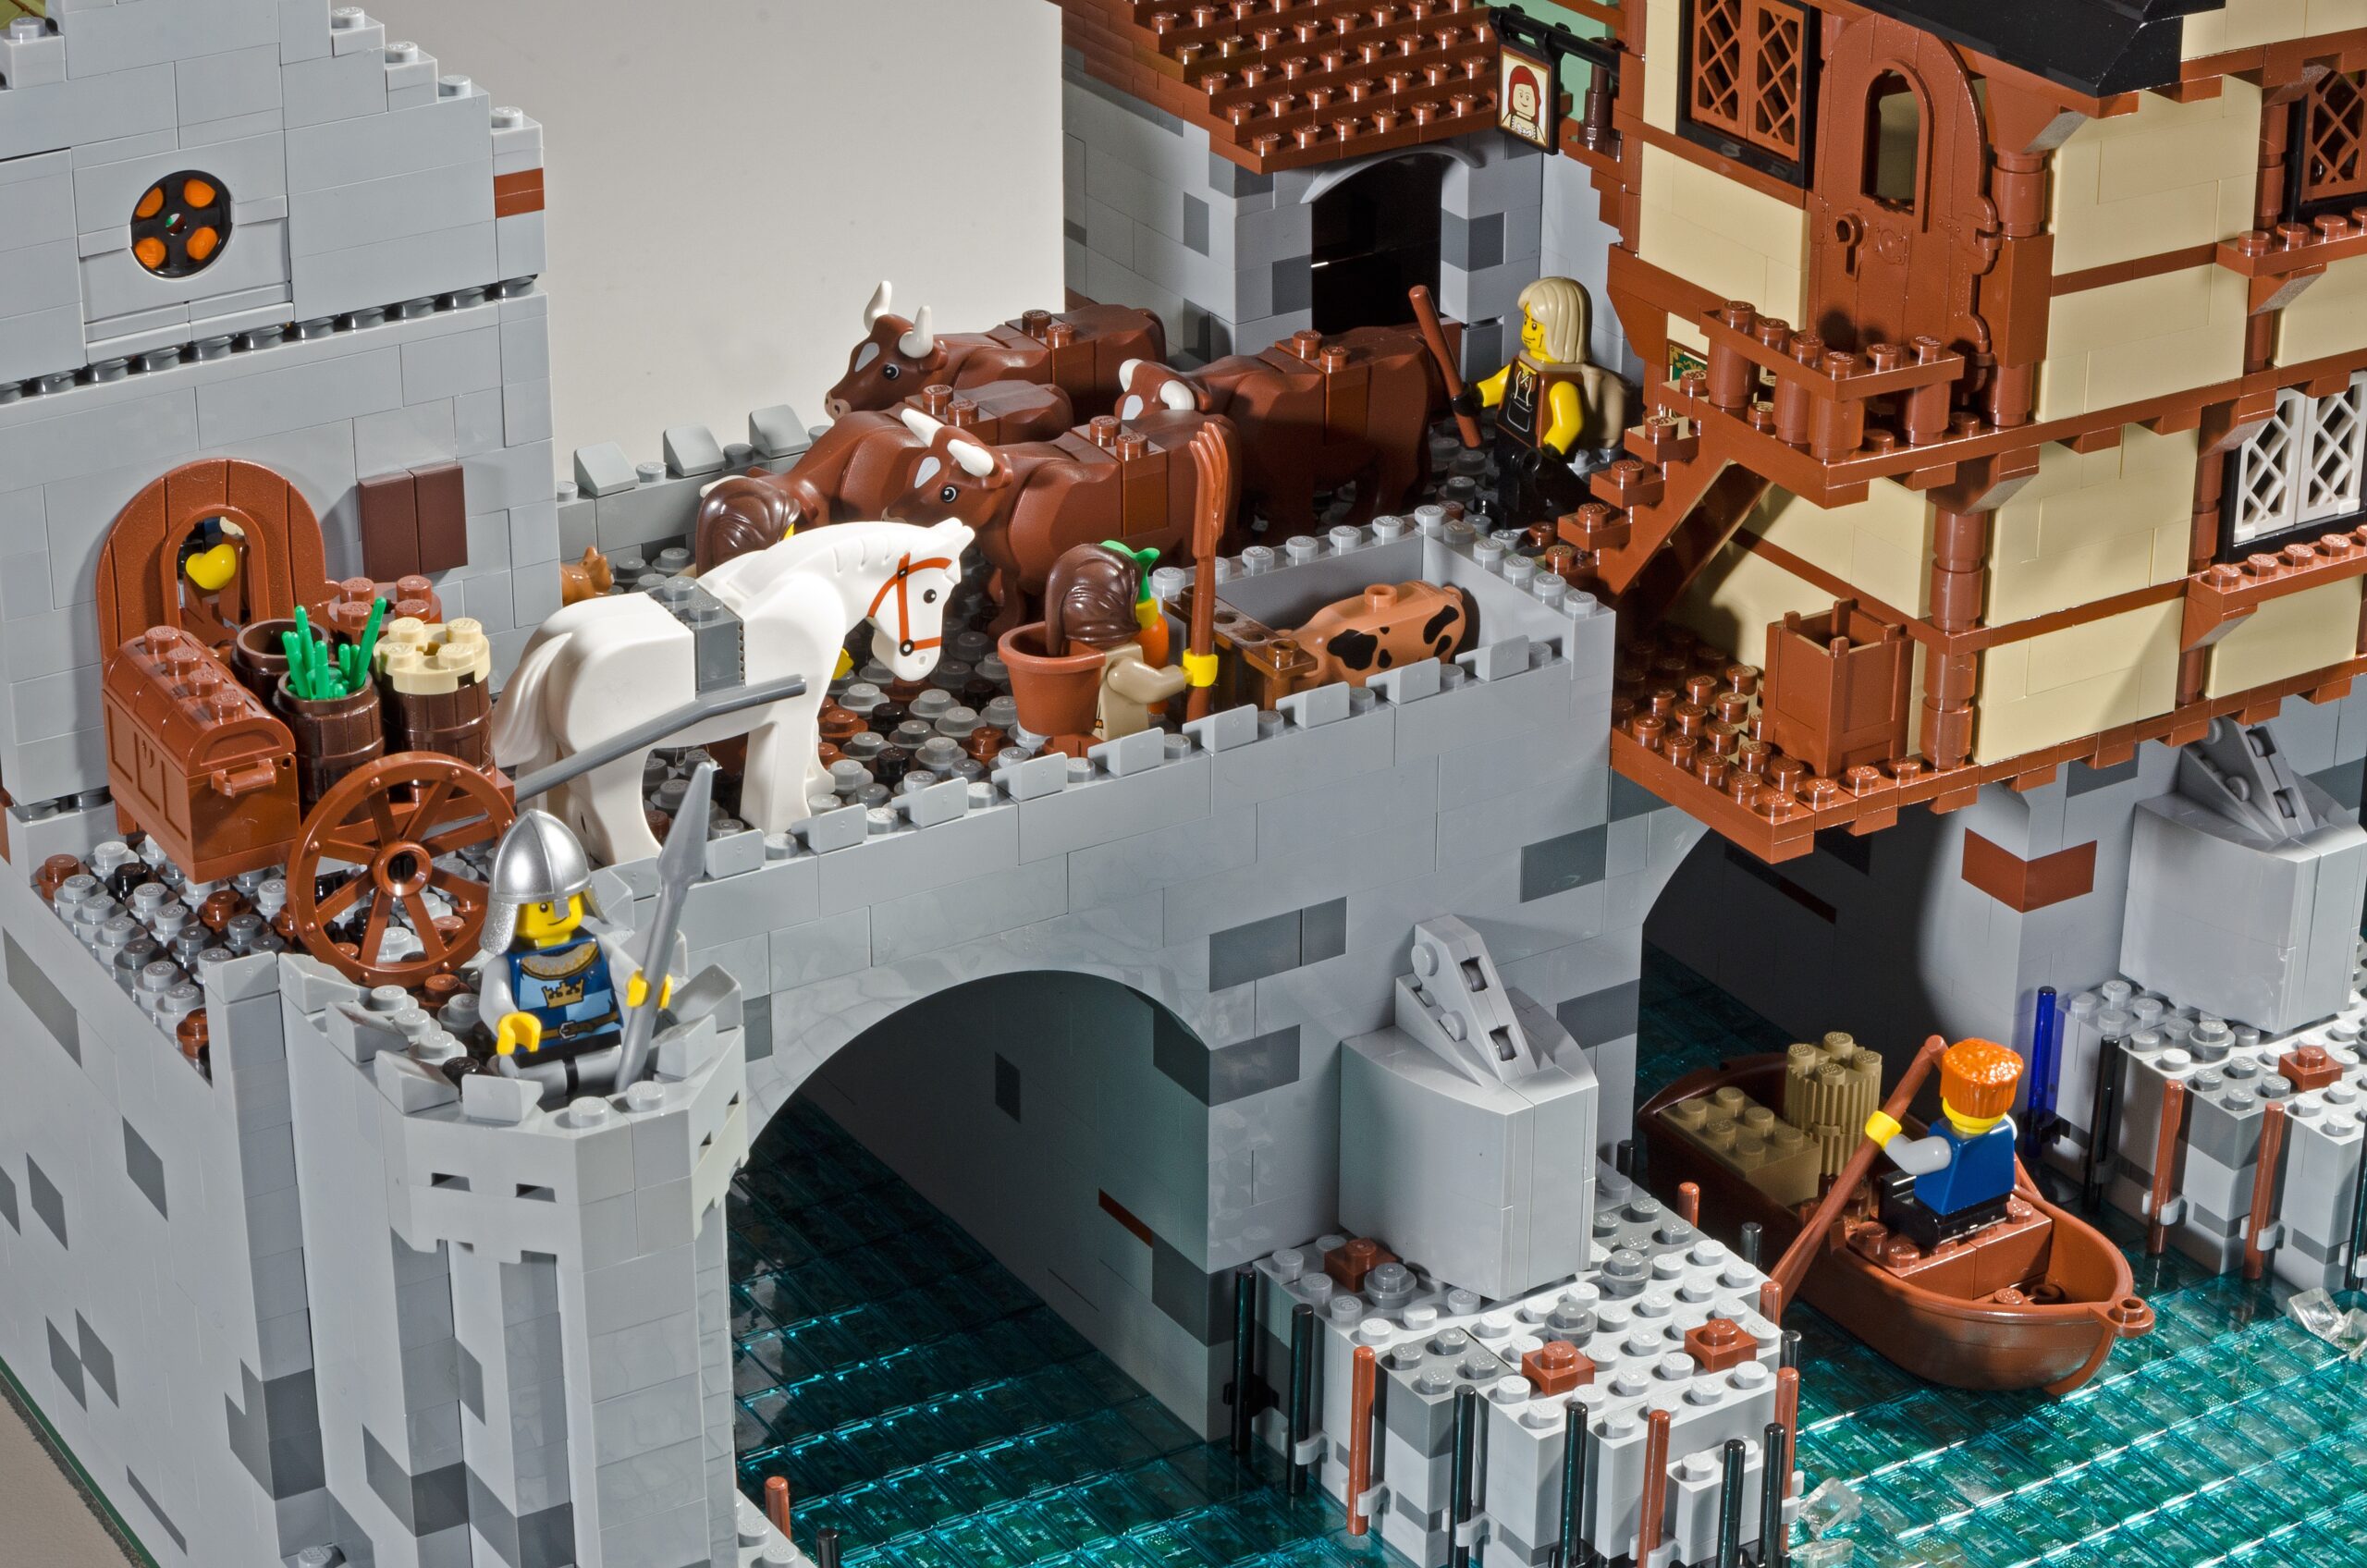 Old London Bridge features in the Brick Wonders exhibition at The Atkinson in Southport 